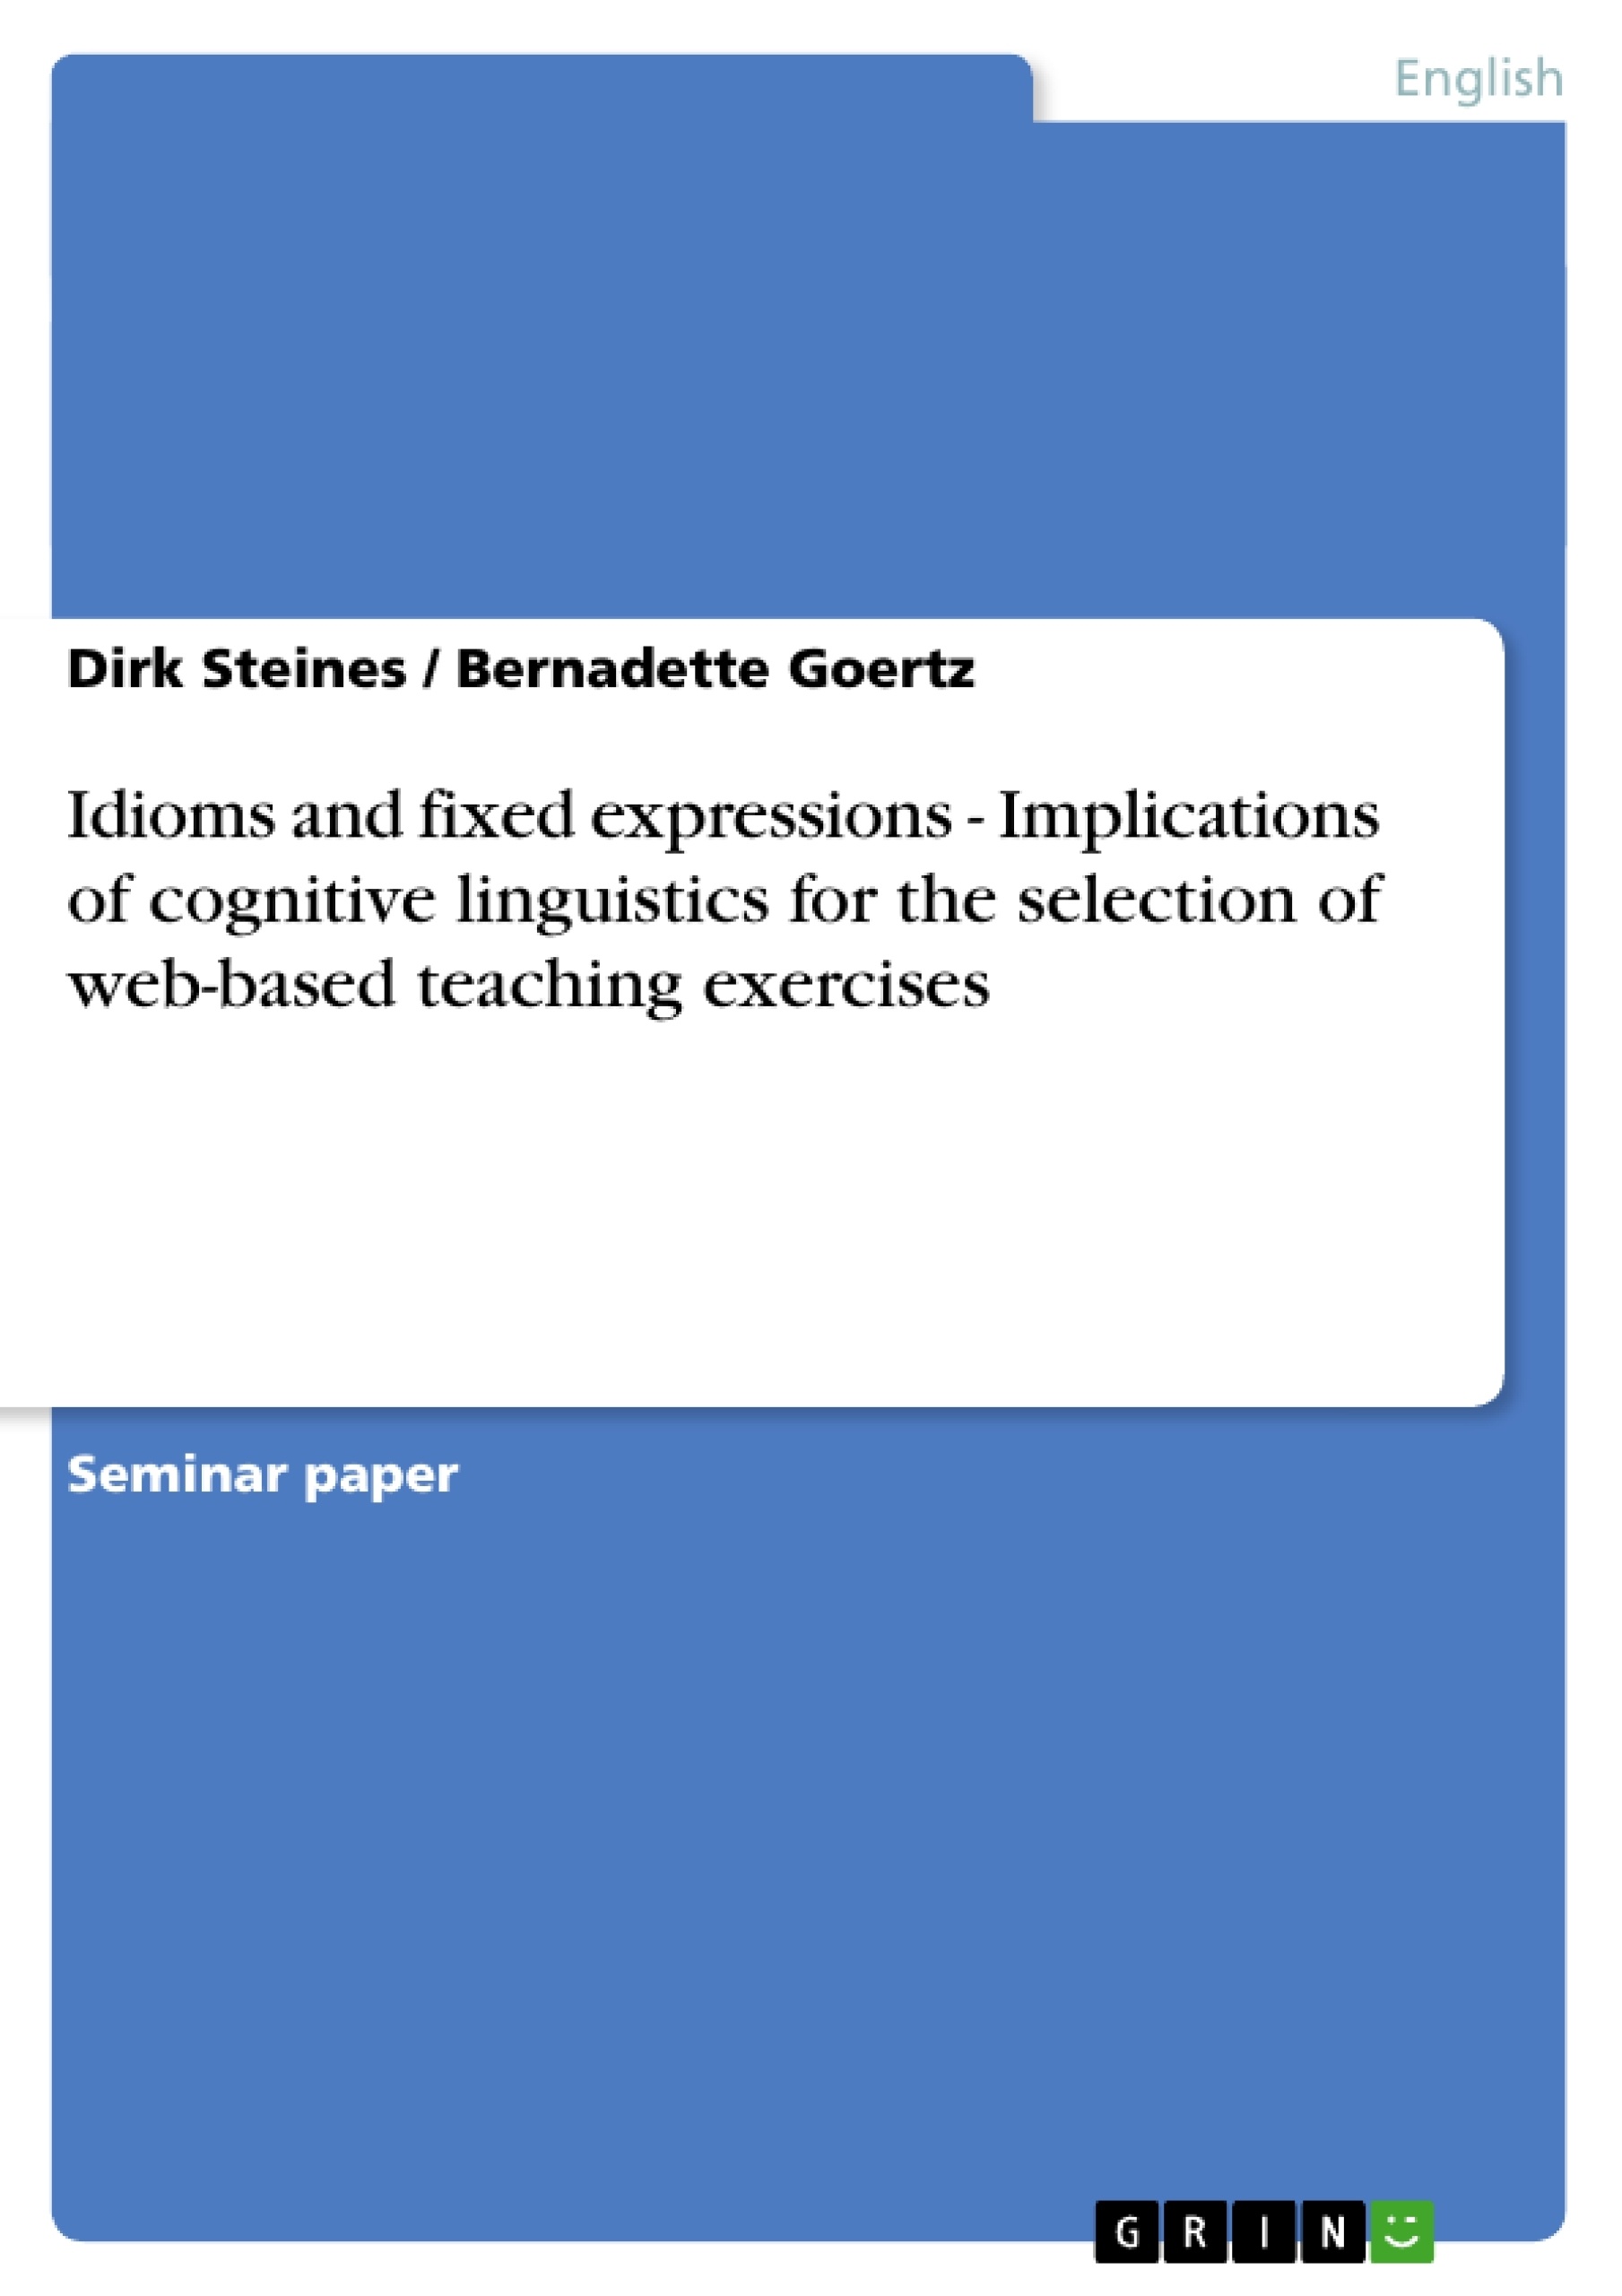 Titre: Idioms and fixed expressions - Implications of cognitive linguistics for the selection of web-based teaching exercises